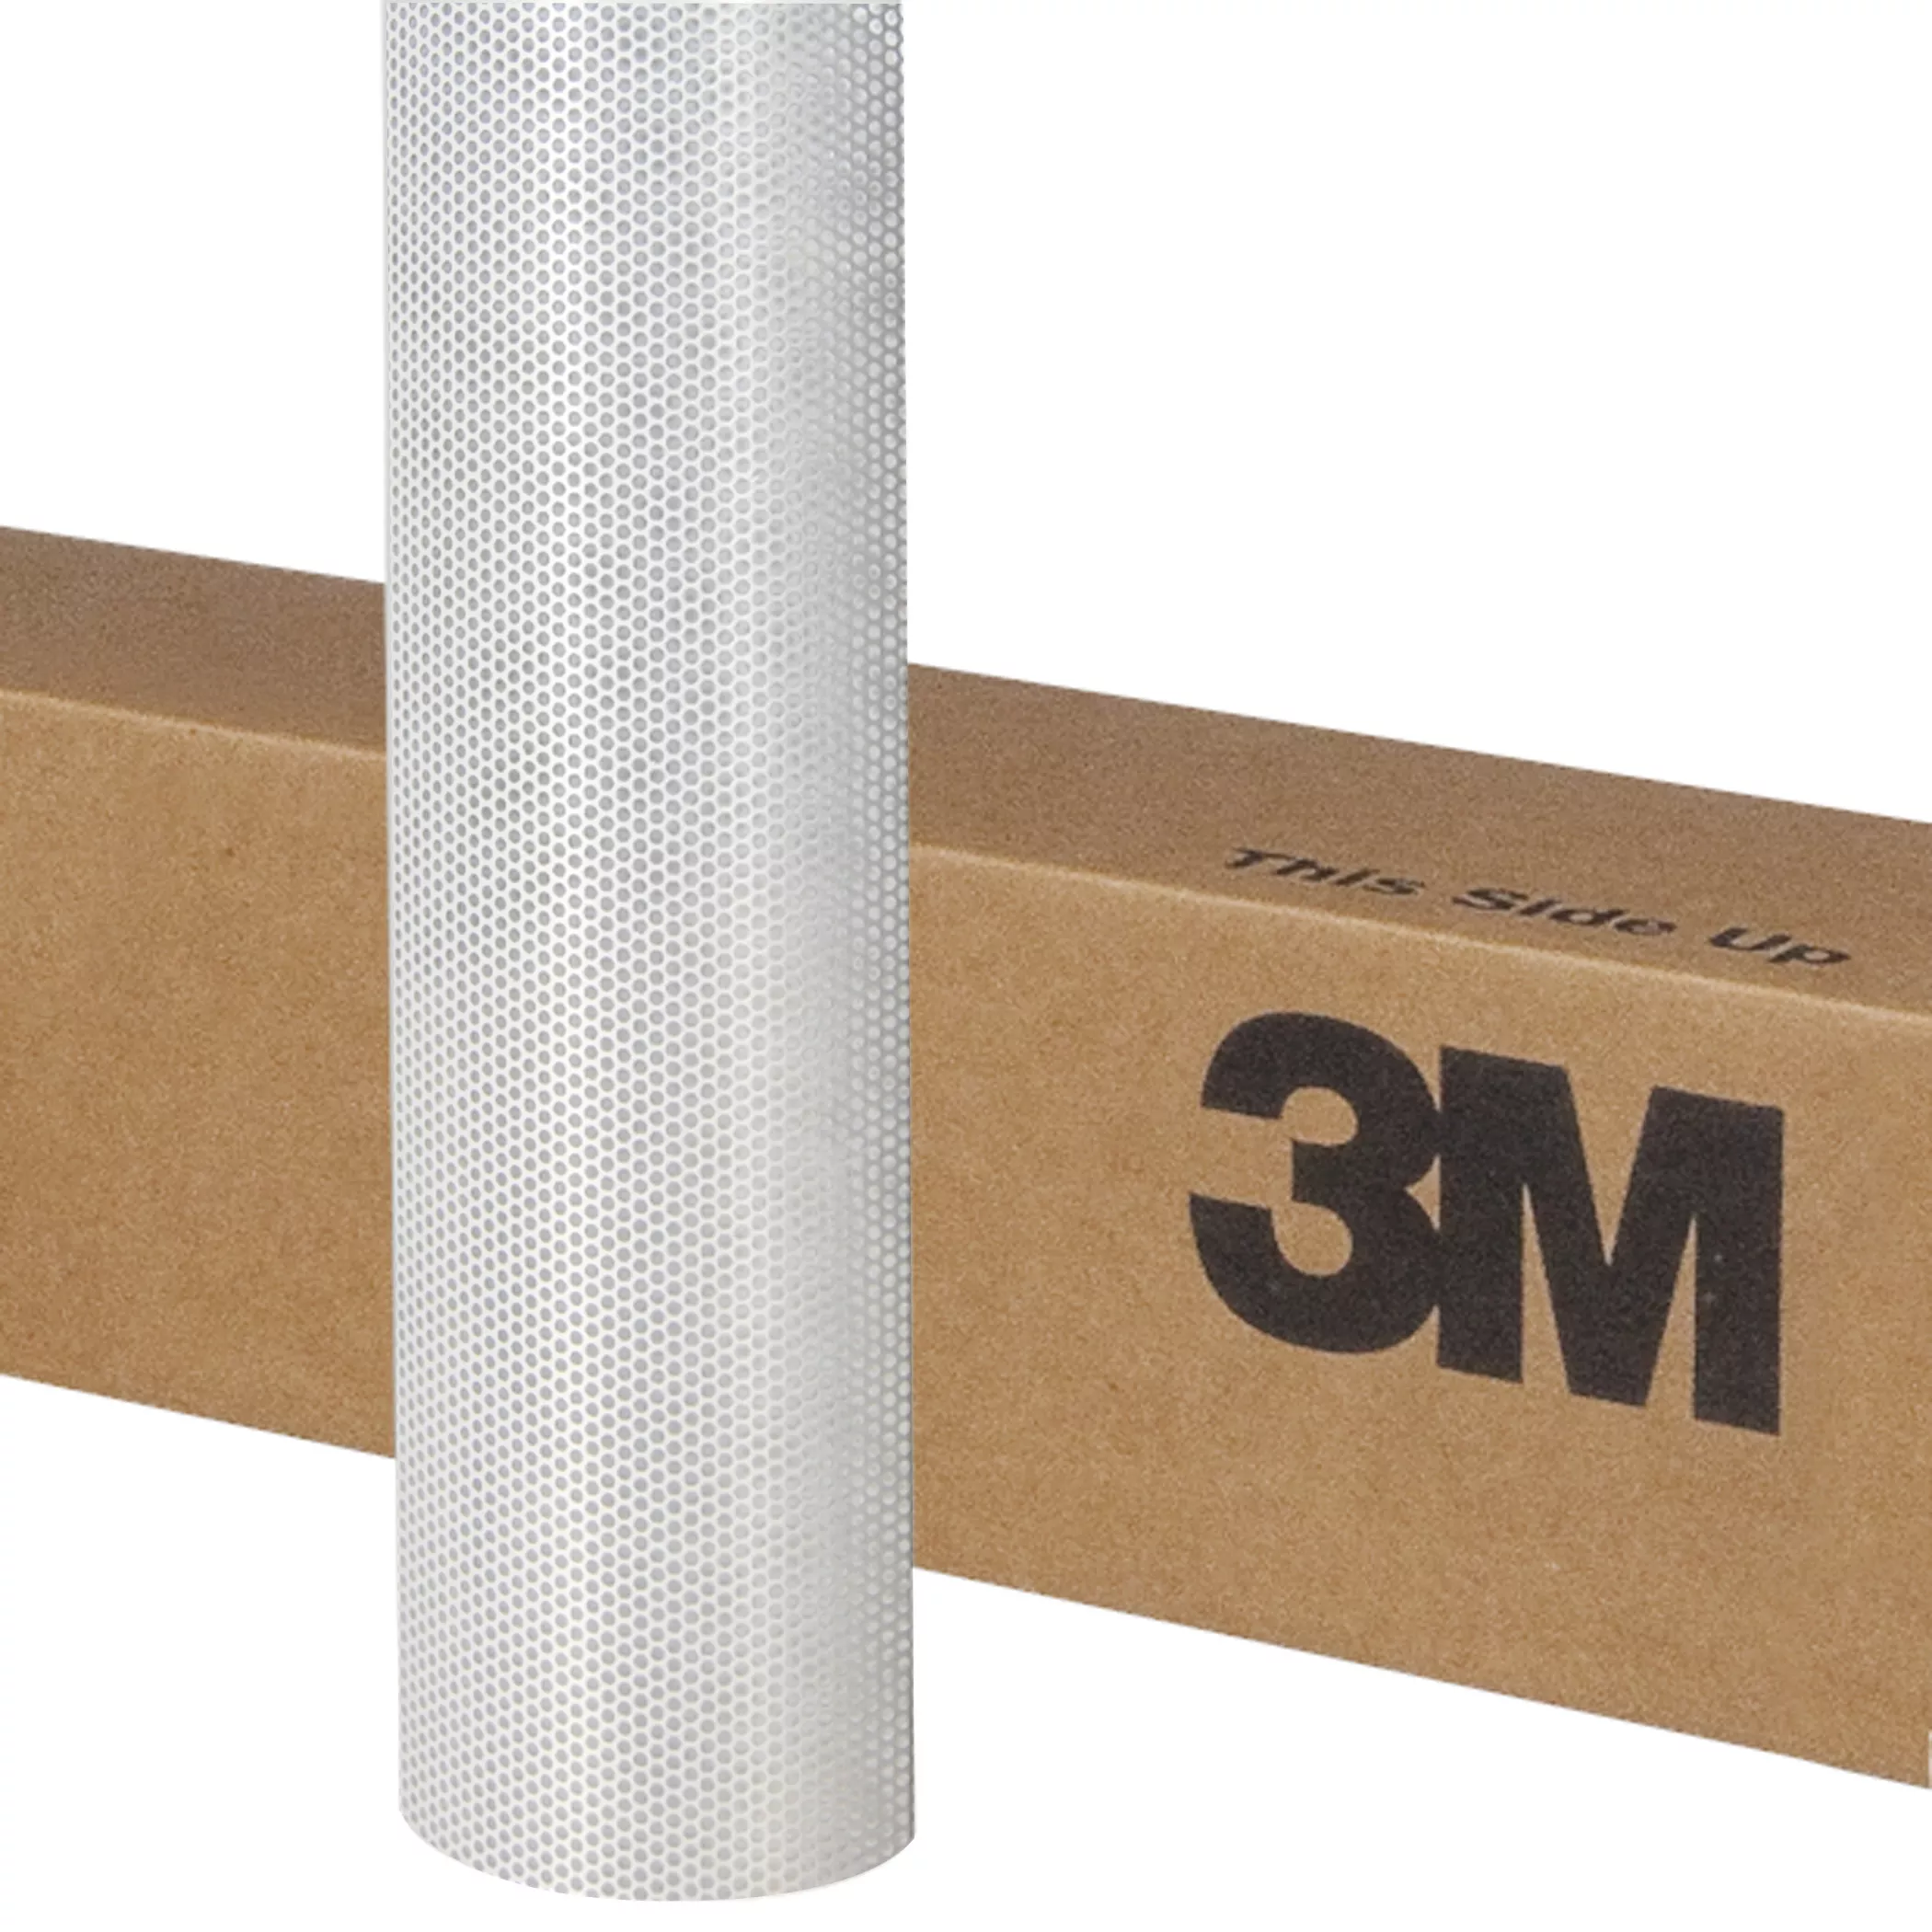 3M™ Scotchcal™ Perforated Window Film IJ67, White, 54 in x 50 yd